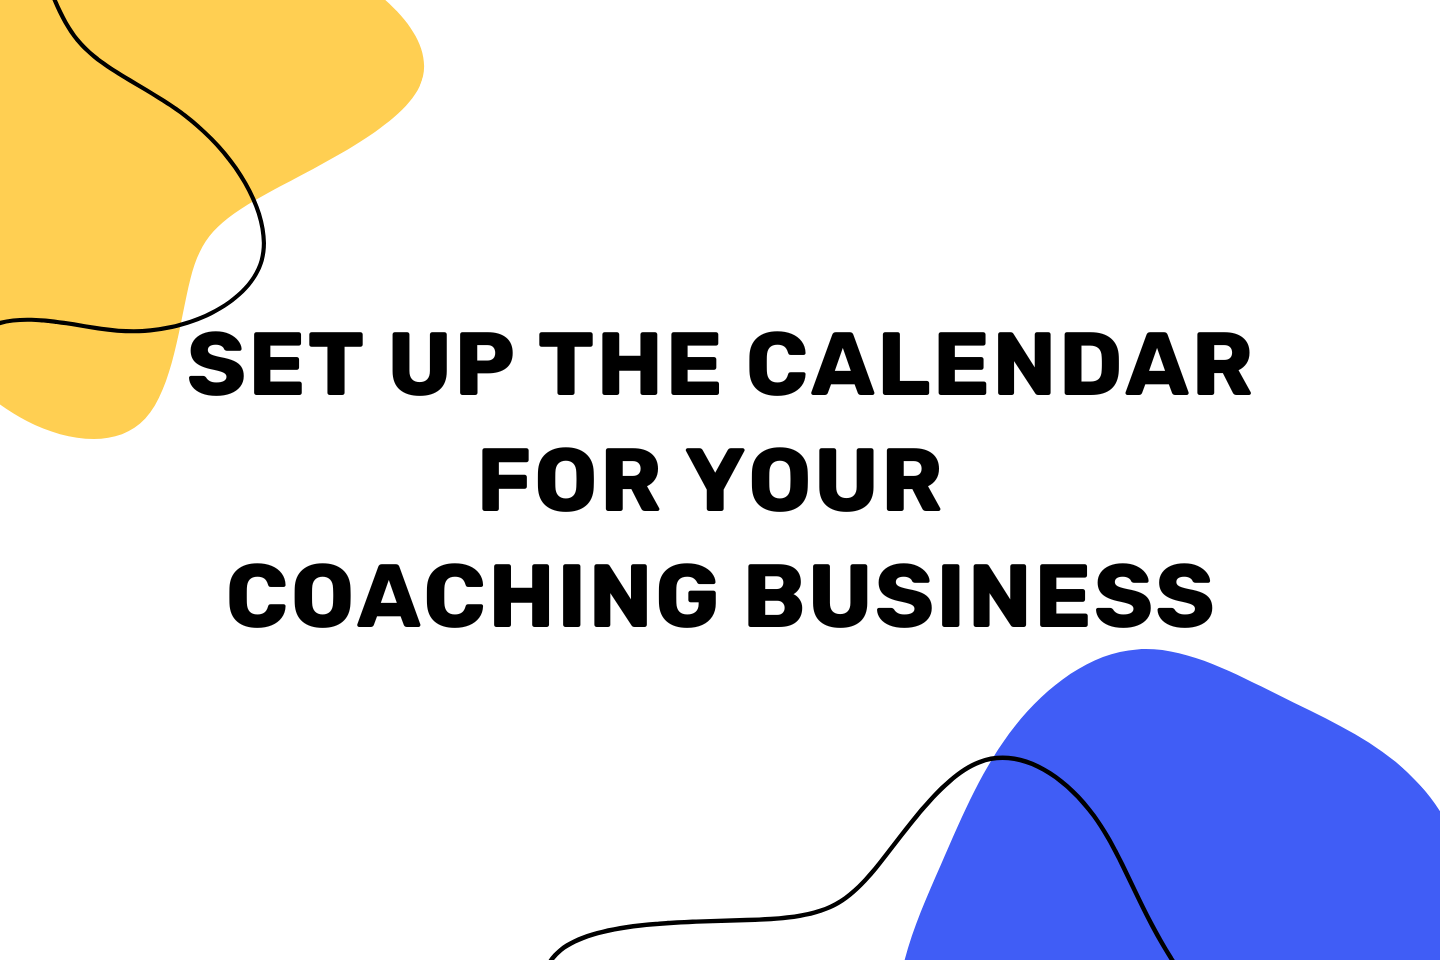 Set Up the Calendar for Your Coaching Business